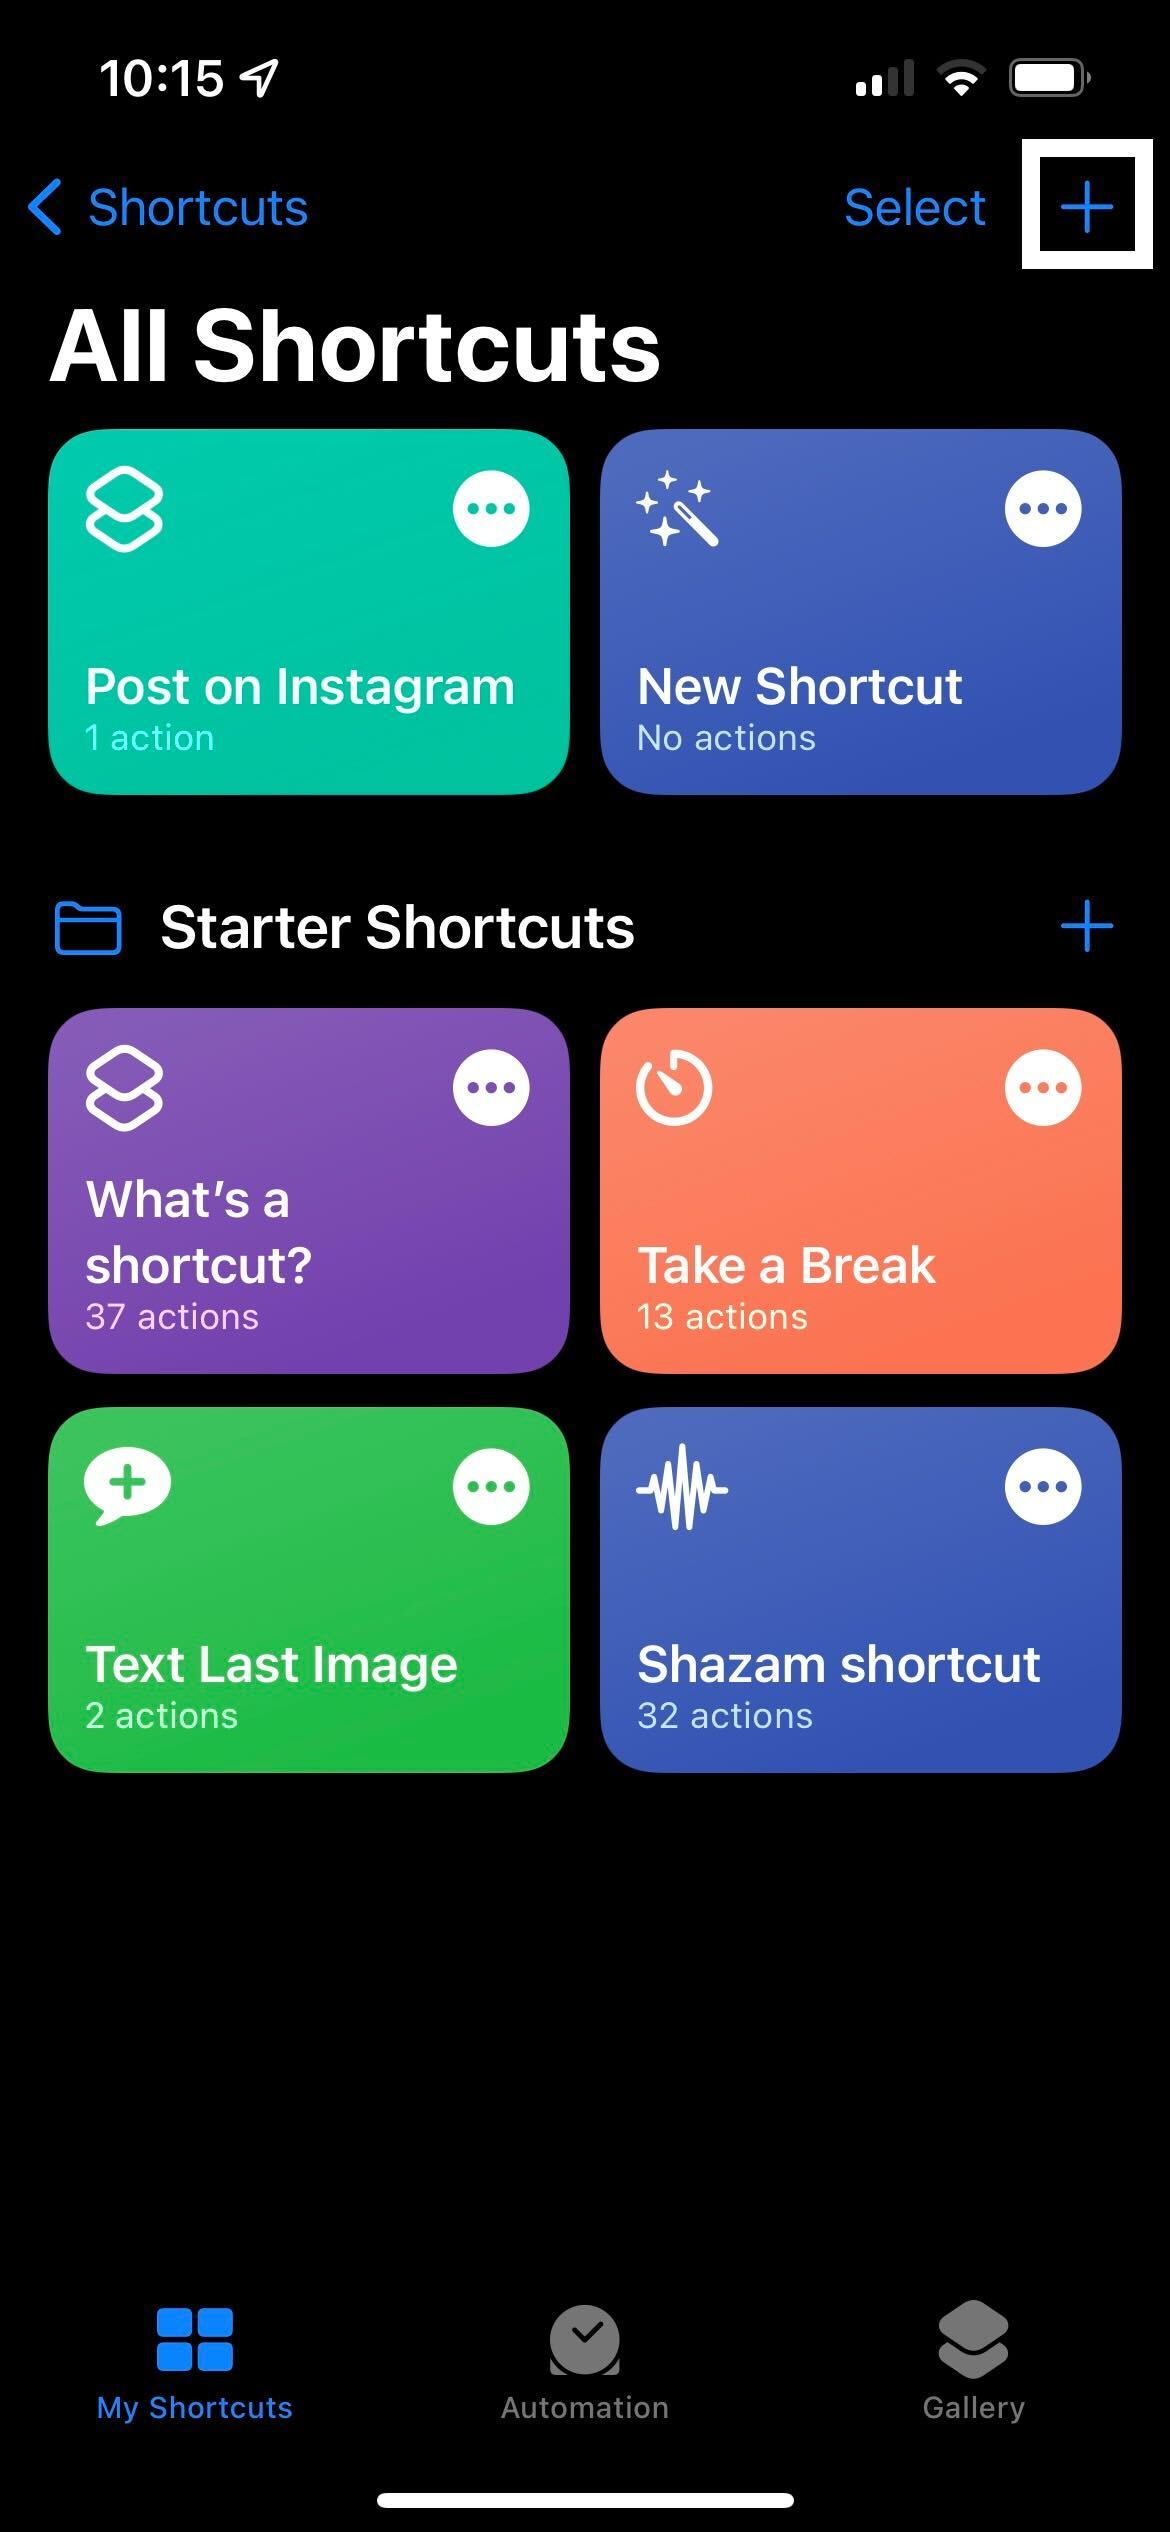 The start of the Shortcuts app on iOS